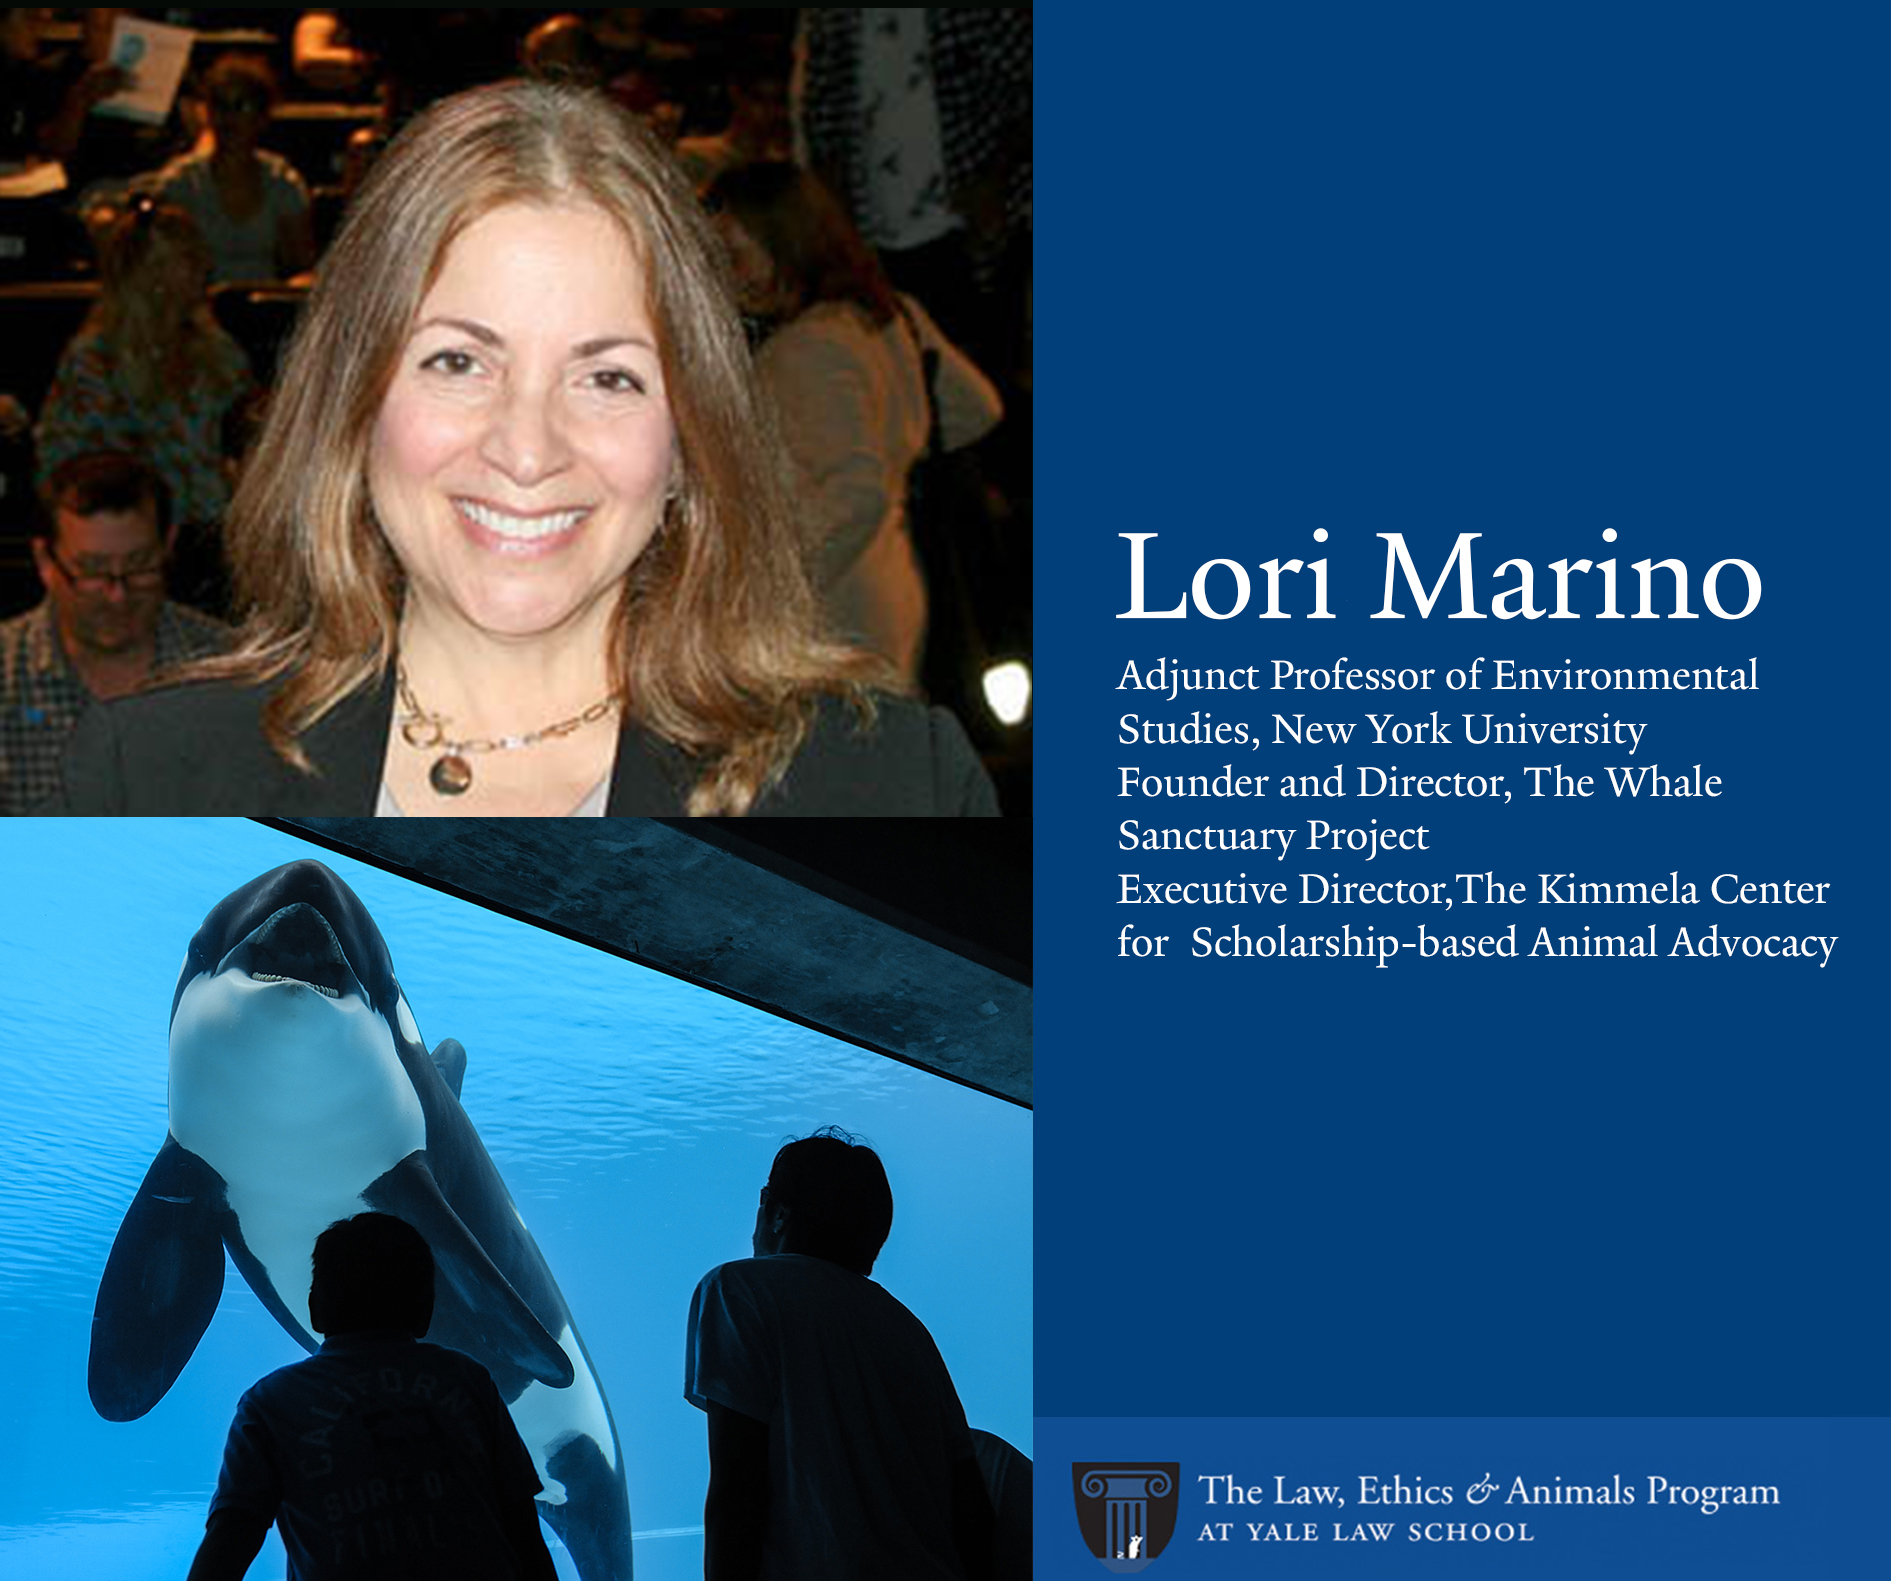 Text: Lori Marino, Adjunct Professor of Environmental Studies at New York University, founder and President of the Whale Sanctuary Project and Executive Director, The Kimmela Center for Scholarship-based Animal Advocacy. Photos: 1. Mariano 2. Orcas in an aquarium